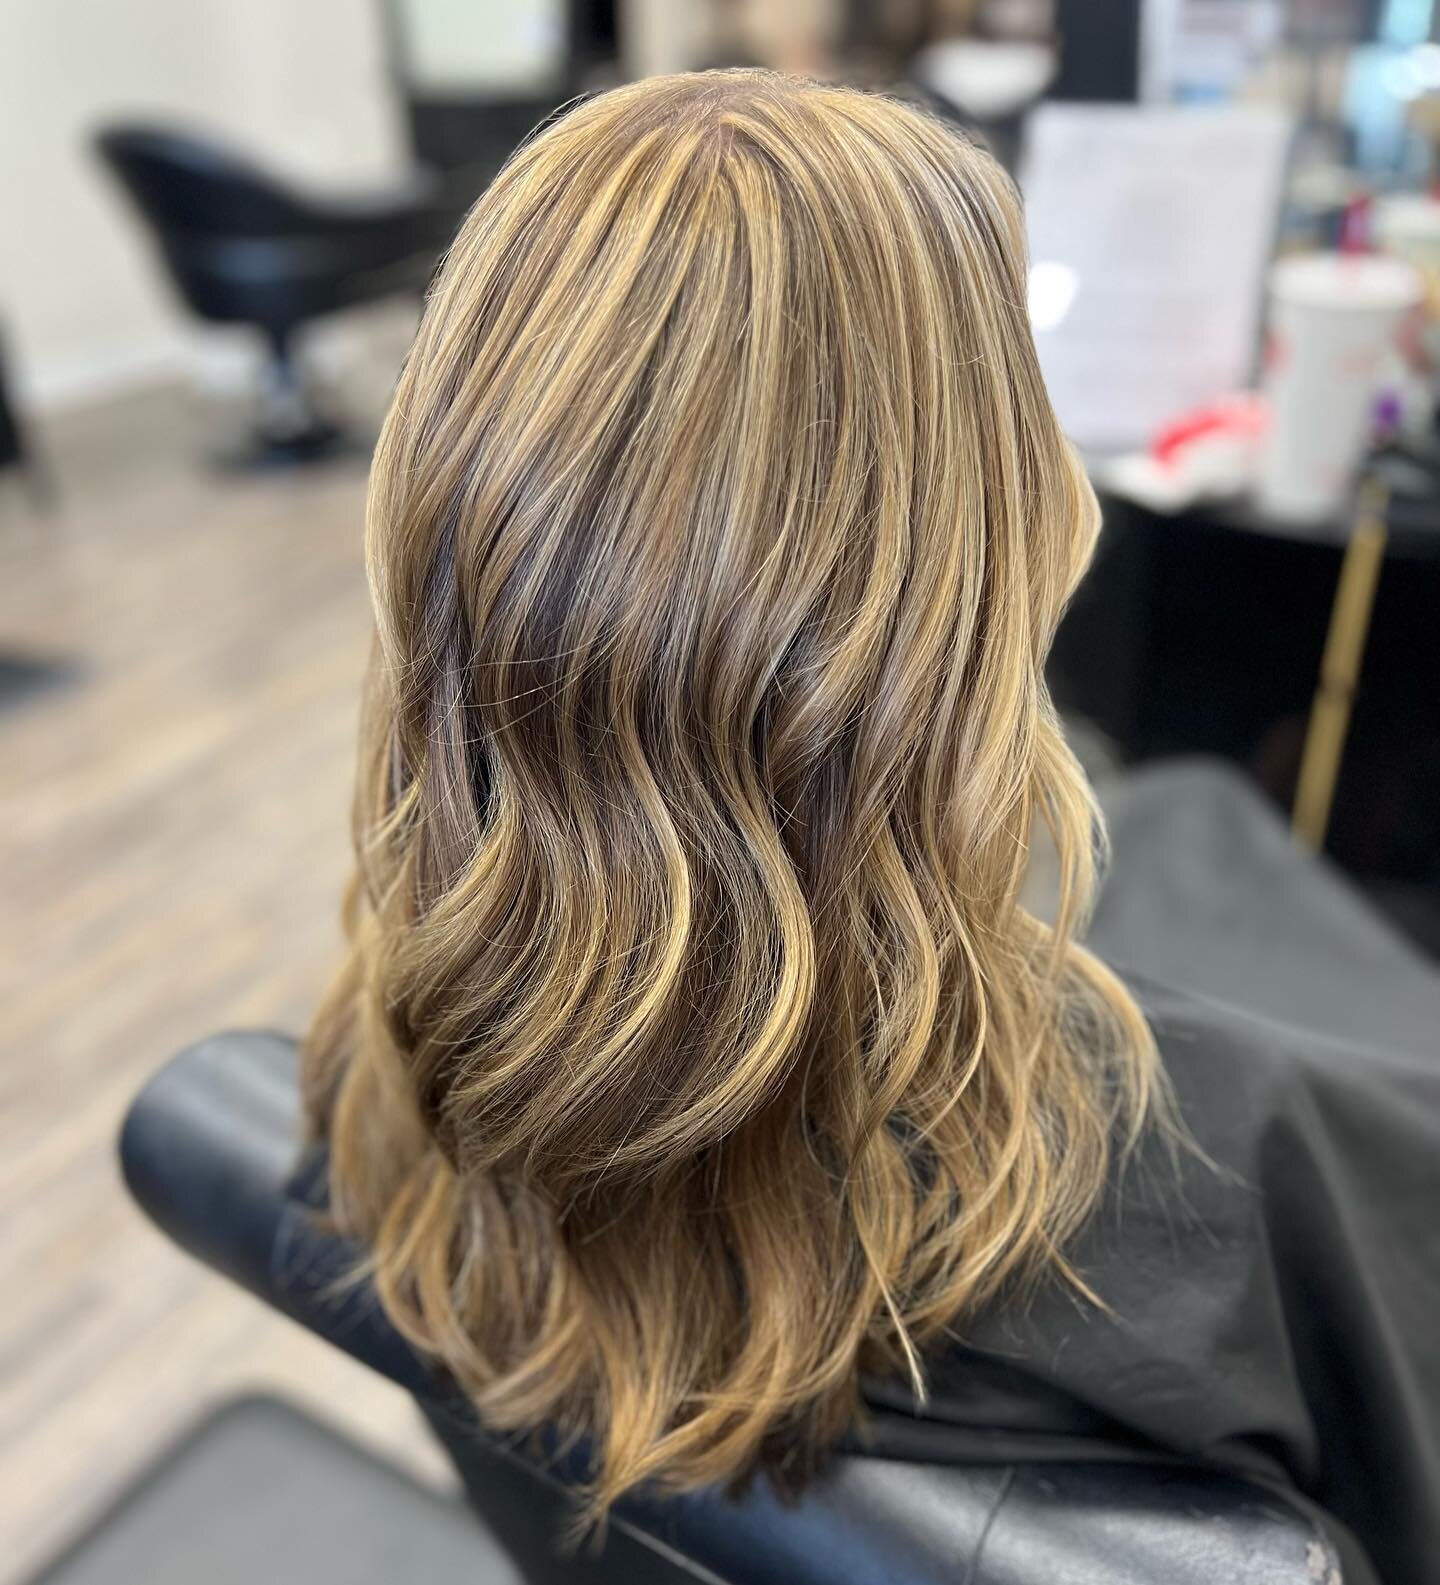 the perfect beige doesn't exist- YES IT DOES🙈🙈

also 3 rows of @perfectress_us ultimate link weft extensions to give this babe some length and volume in preparation for her wedding day!! 🥰🥰